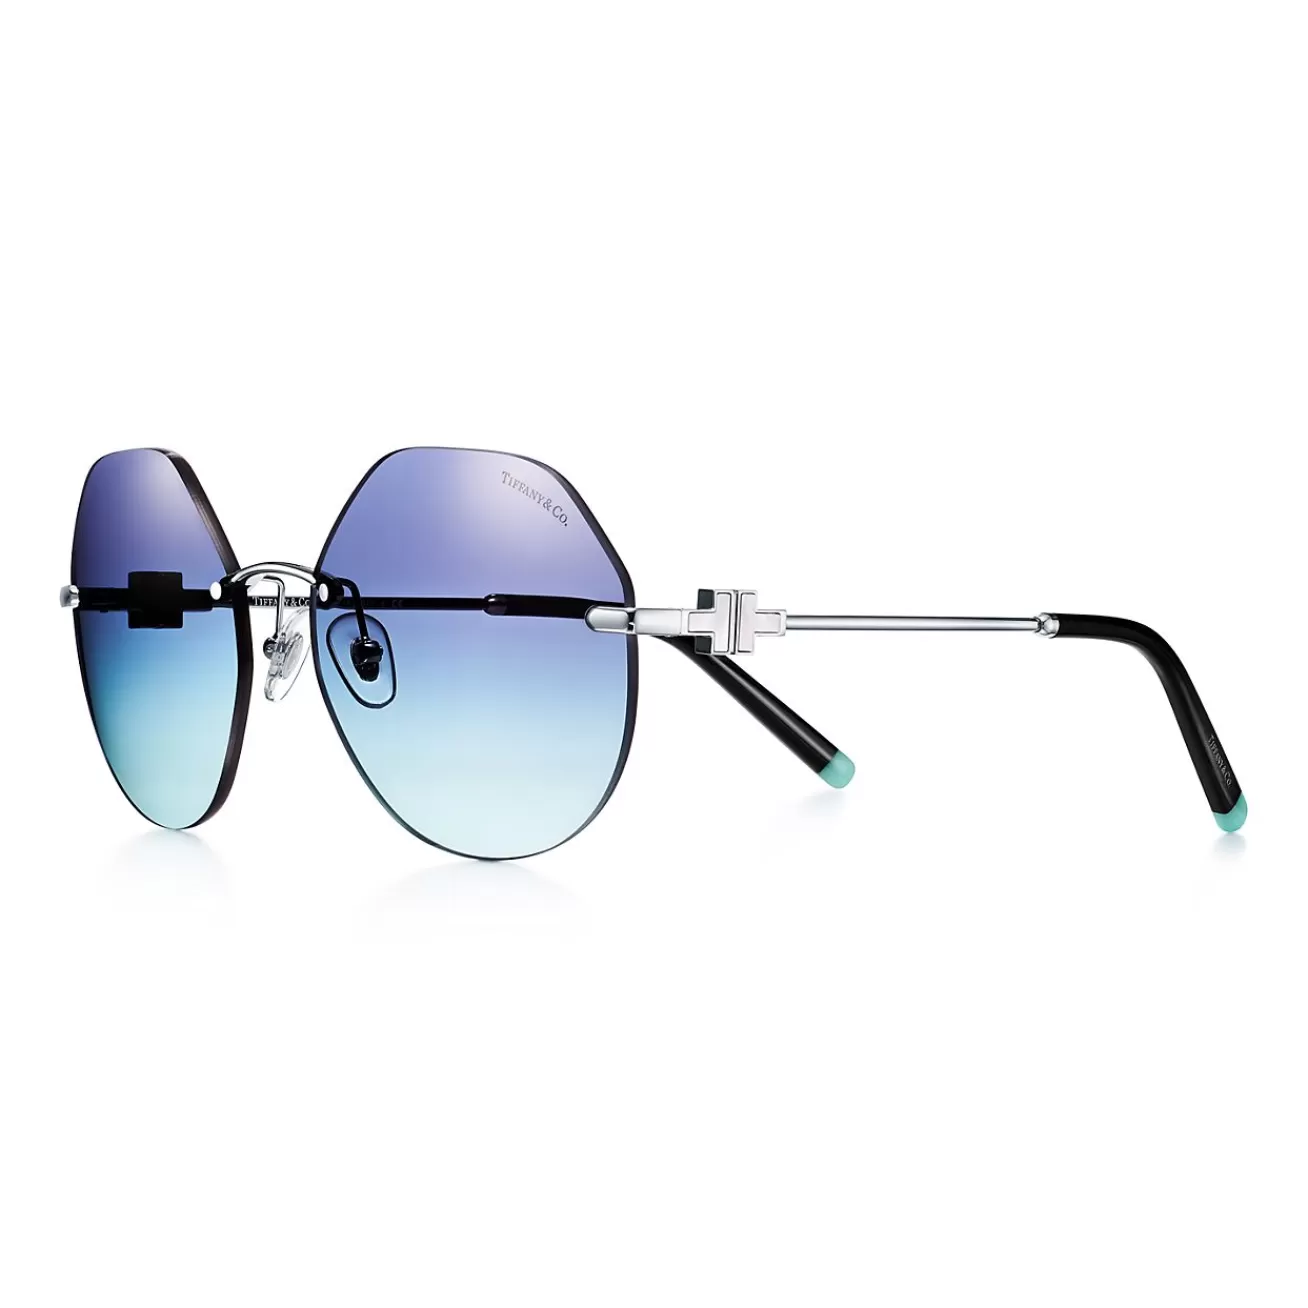 Tiffany & Co. Tiffany T Hexagonal Sunglasses in Silver-colored Metal with Mother-of-pearl | ^ Tiffany T | Sunglasses